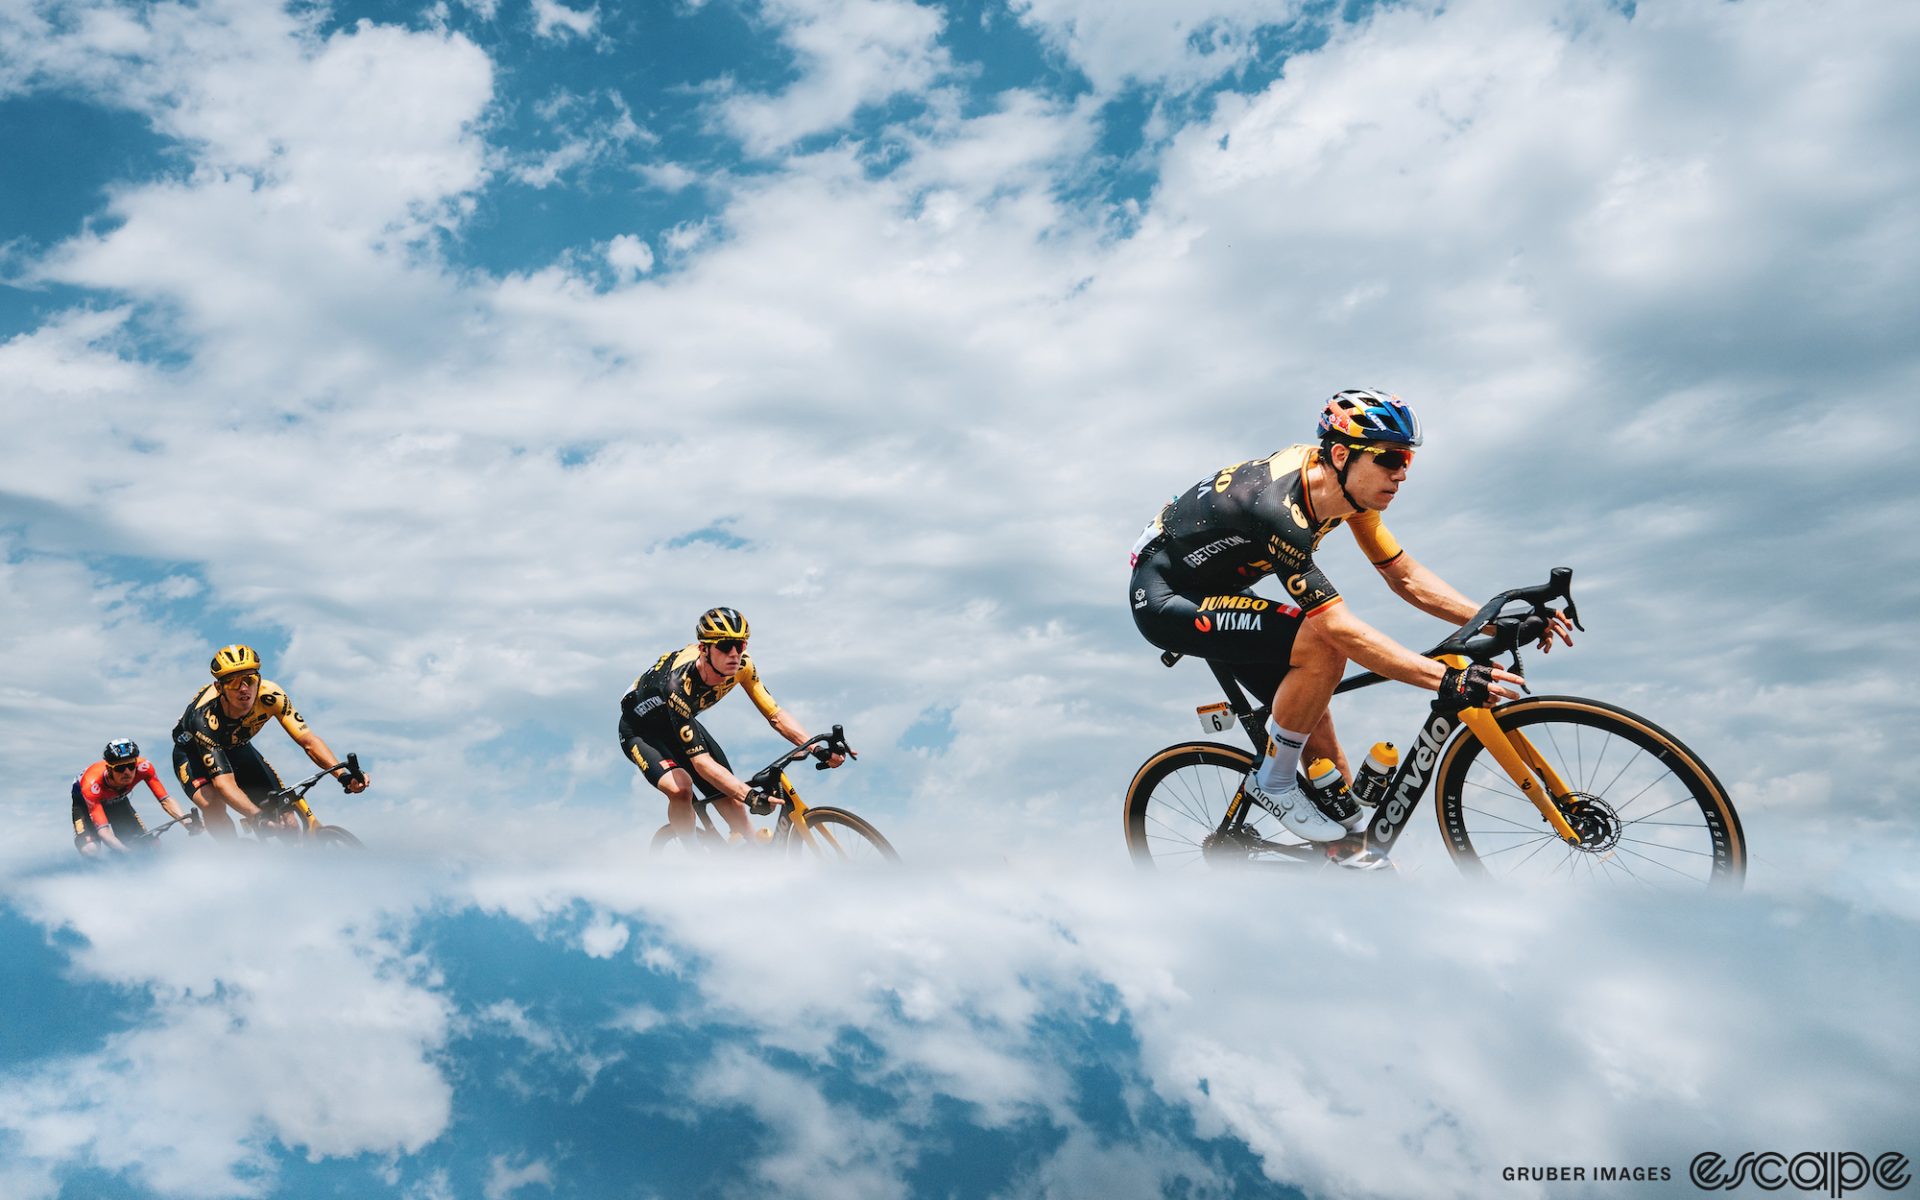 Wout van Aert leads the Jumbo team on a descent at the Tour de France. He leans into the turn and is framed against a blue sky half-covered in white clouds, which are reflected below his bike in the bottom third of the image to make it seem like he's floating in the air.